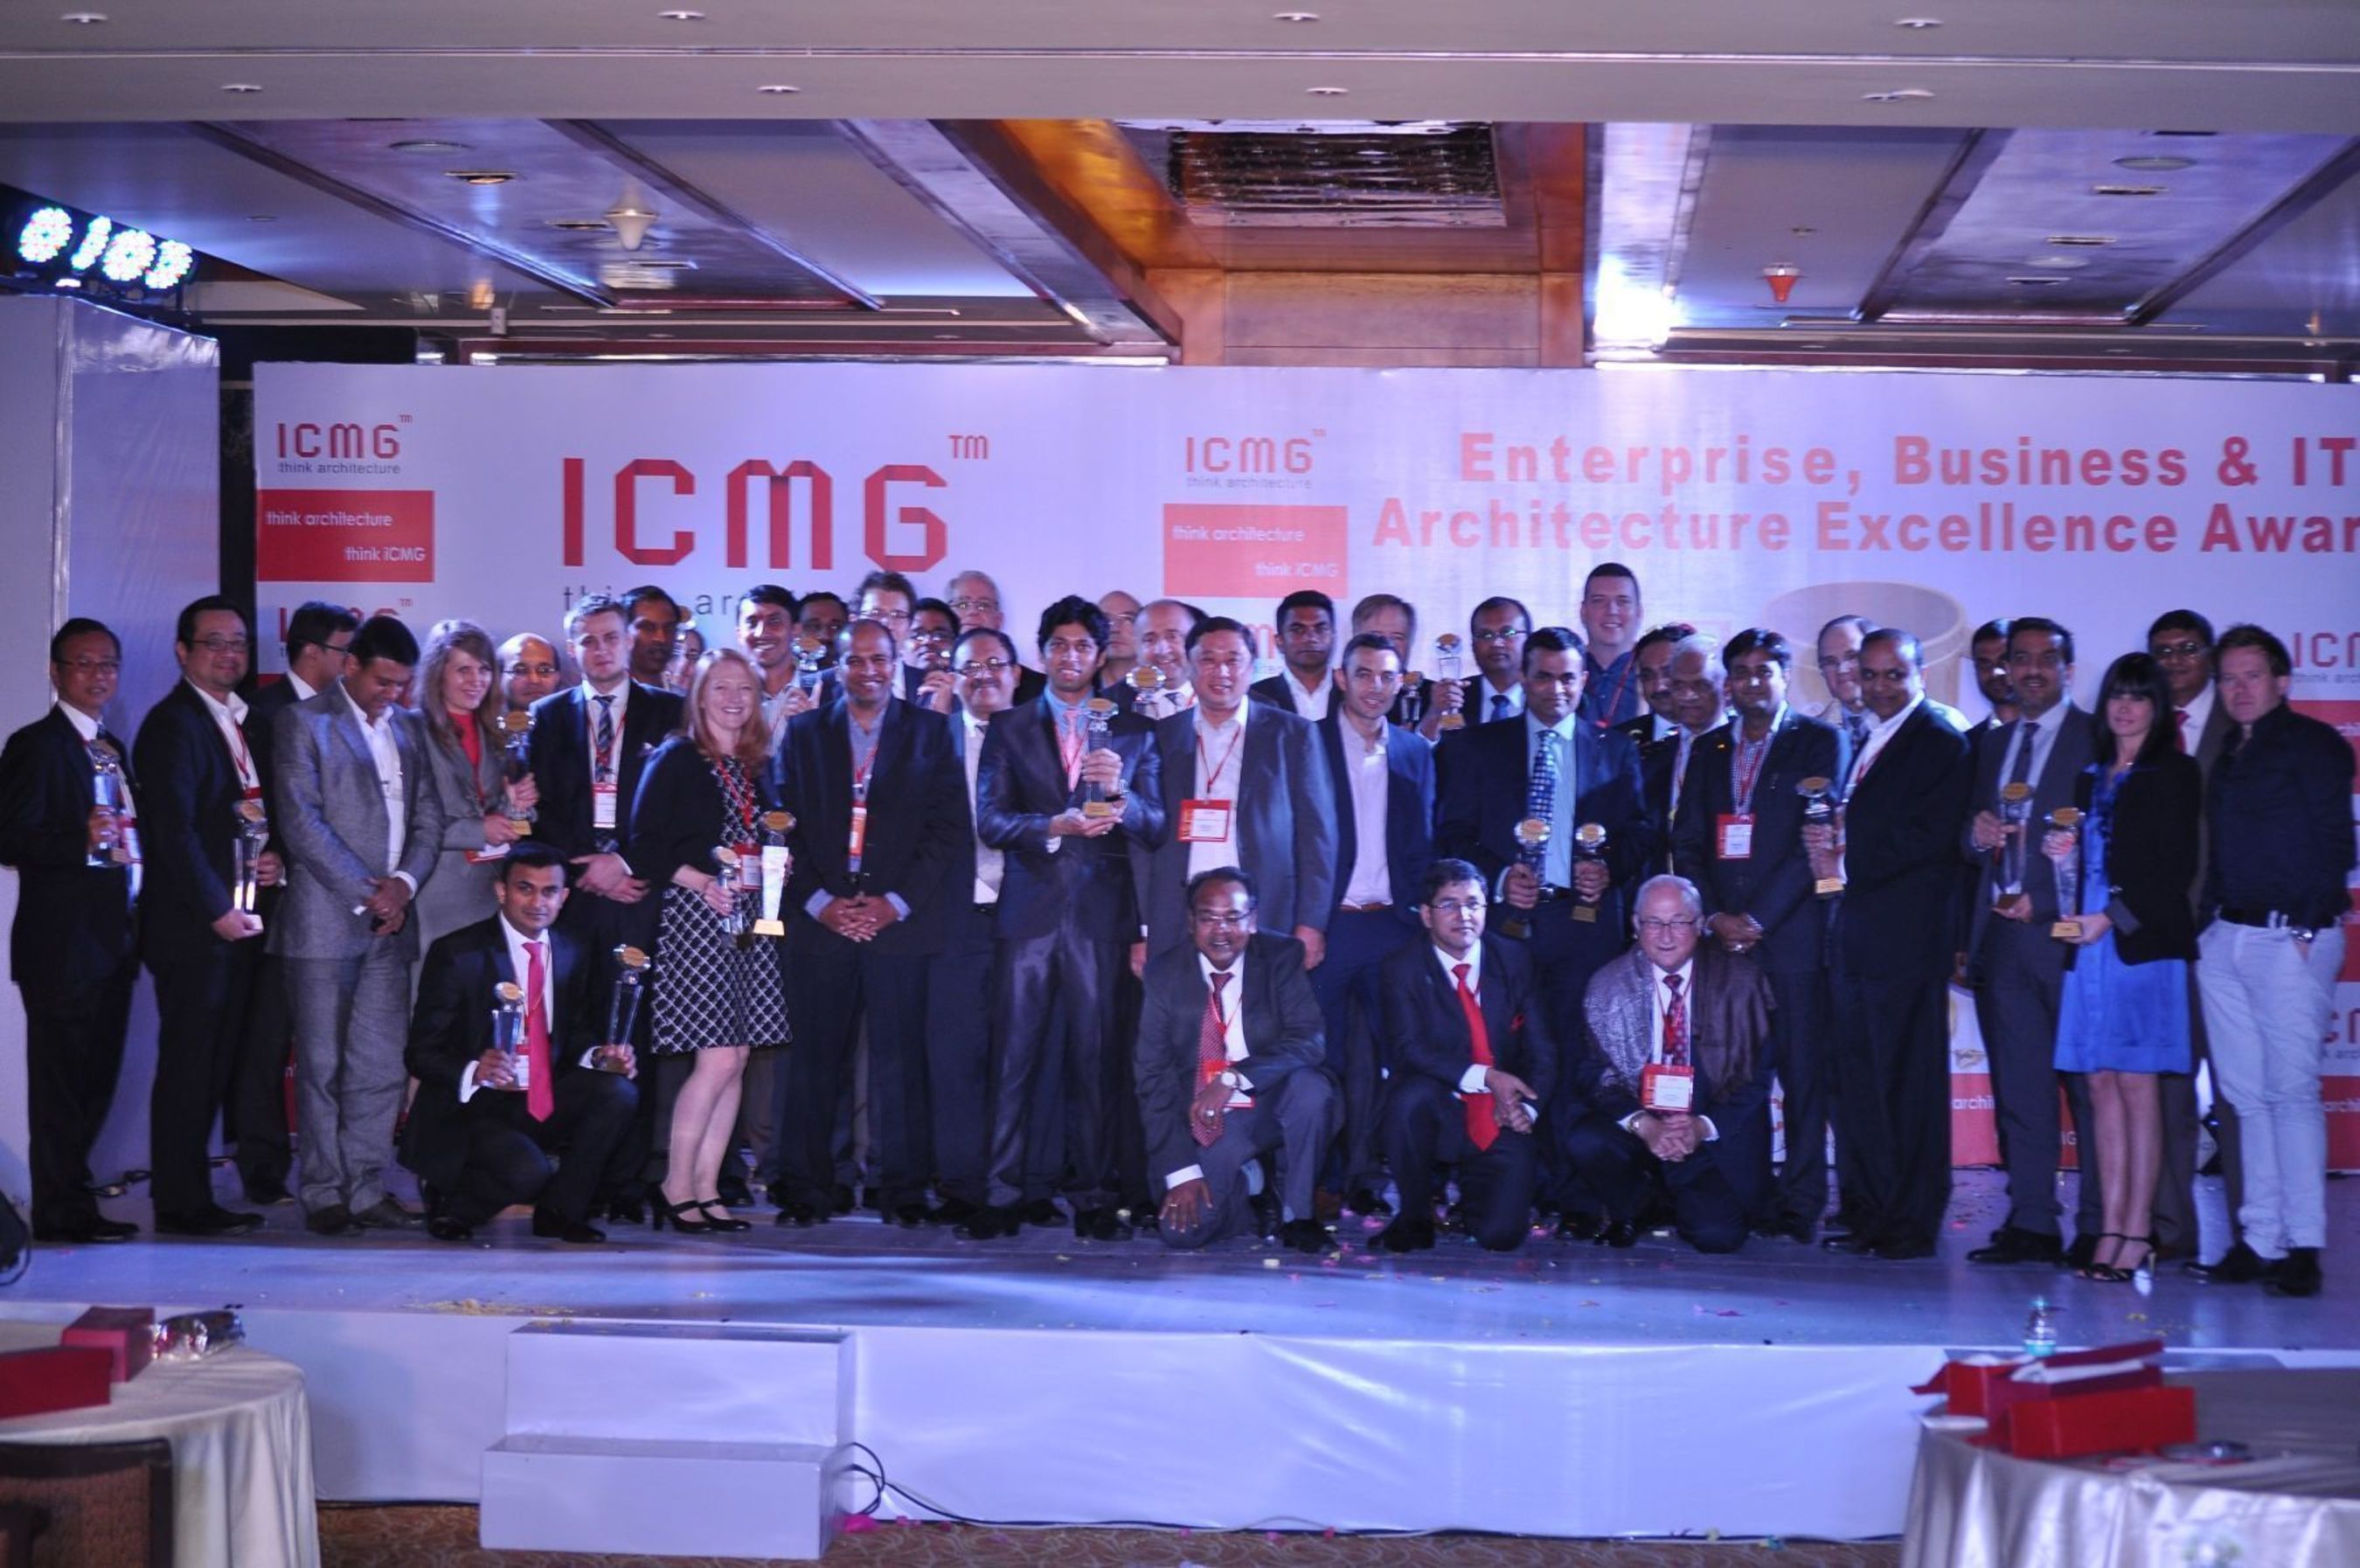 PR NEWSWIRE INDIA - Winners of Architecture Excellence Awards 2014 (PRNewsFoto/iCMG Private Limited)